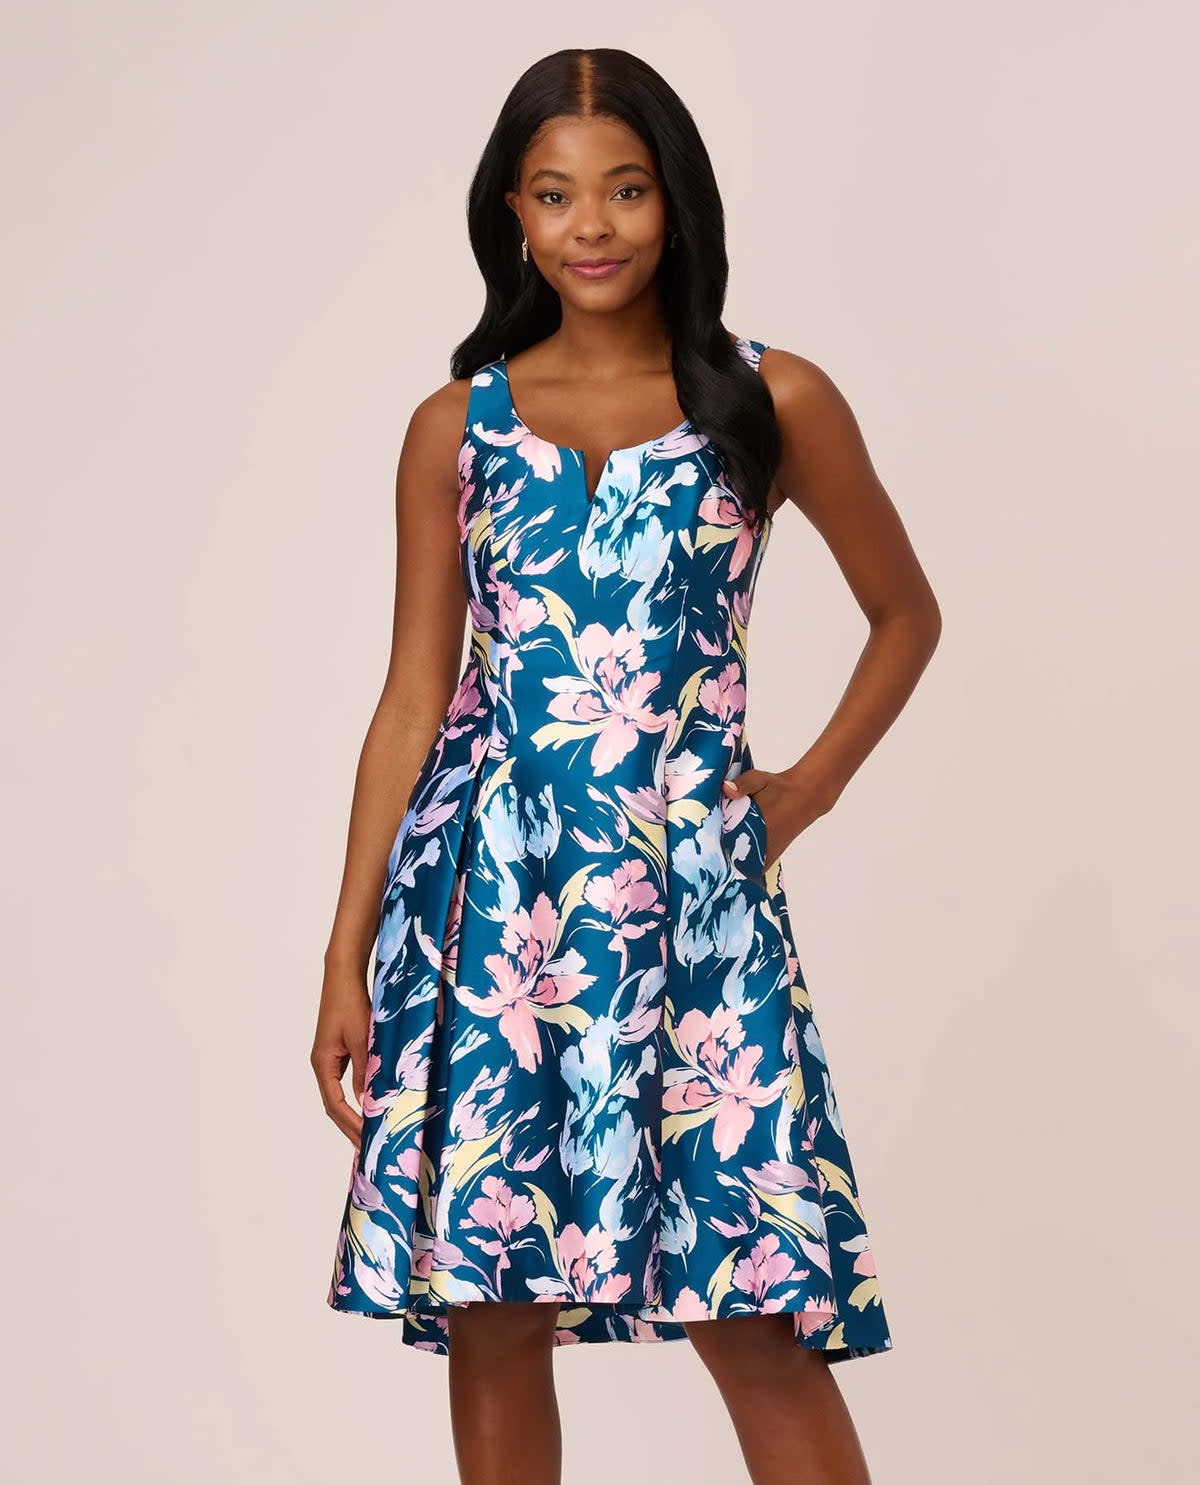 ADRIANNA PAPELL ADRIANNA PAPELL PRINTED MIKADO HIGH-LOW DRESSES